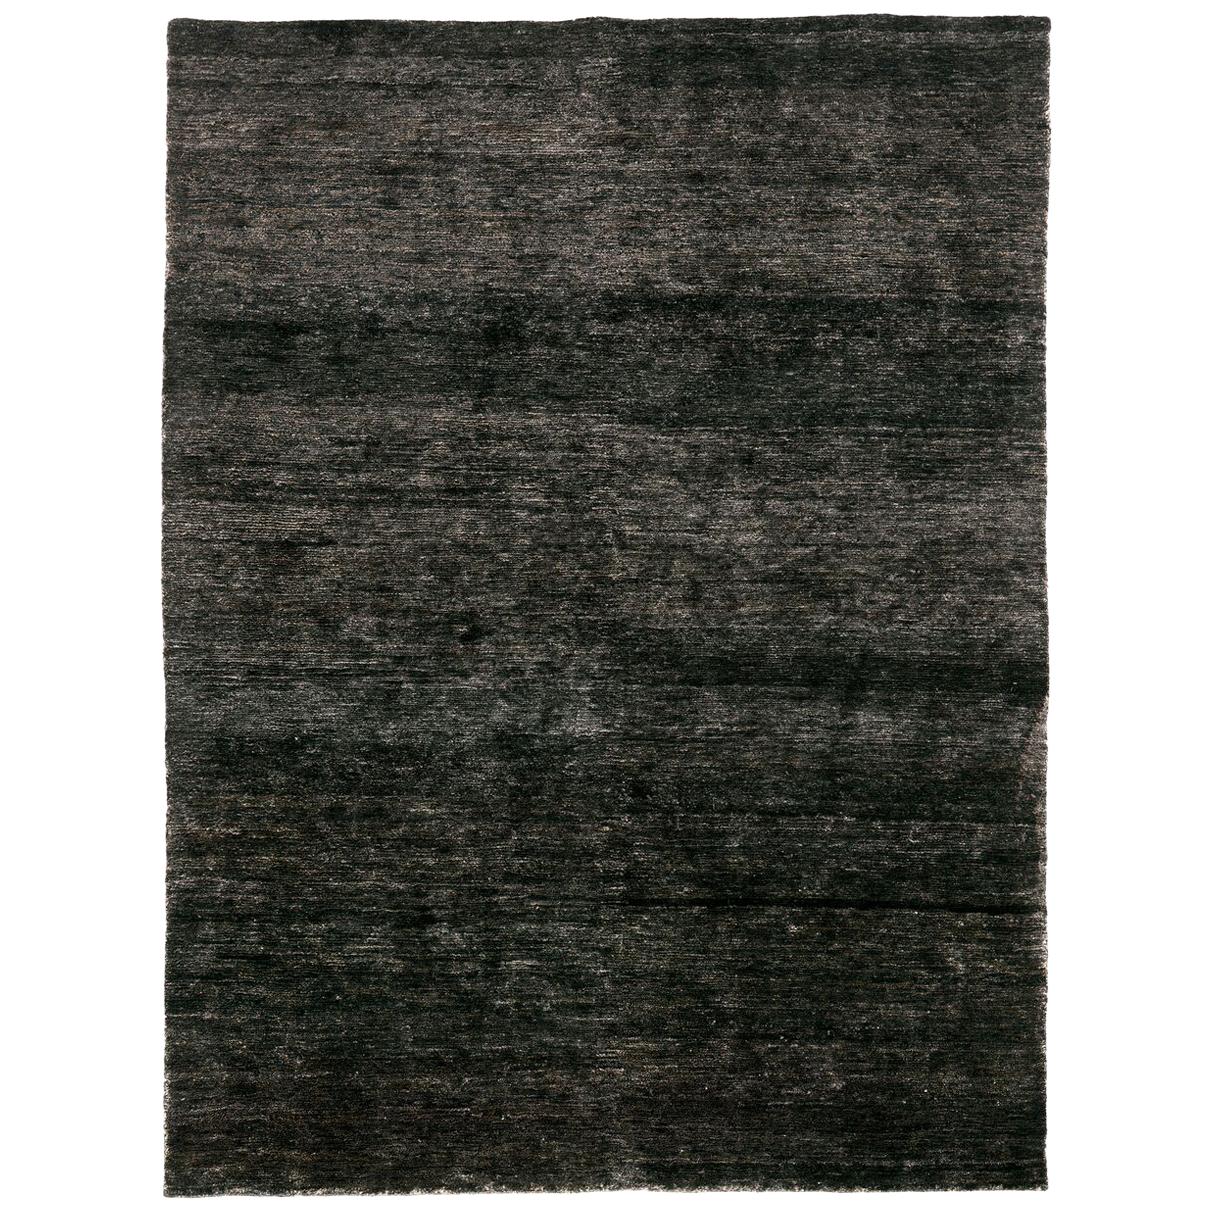 Noche Black Hand-Knotted Jute Rug by Nani Marquina & Ariadna Miquel, Small For Sale